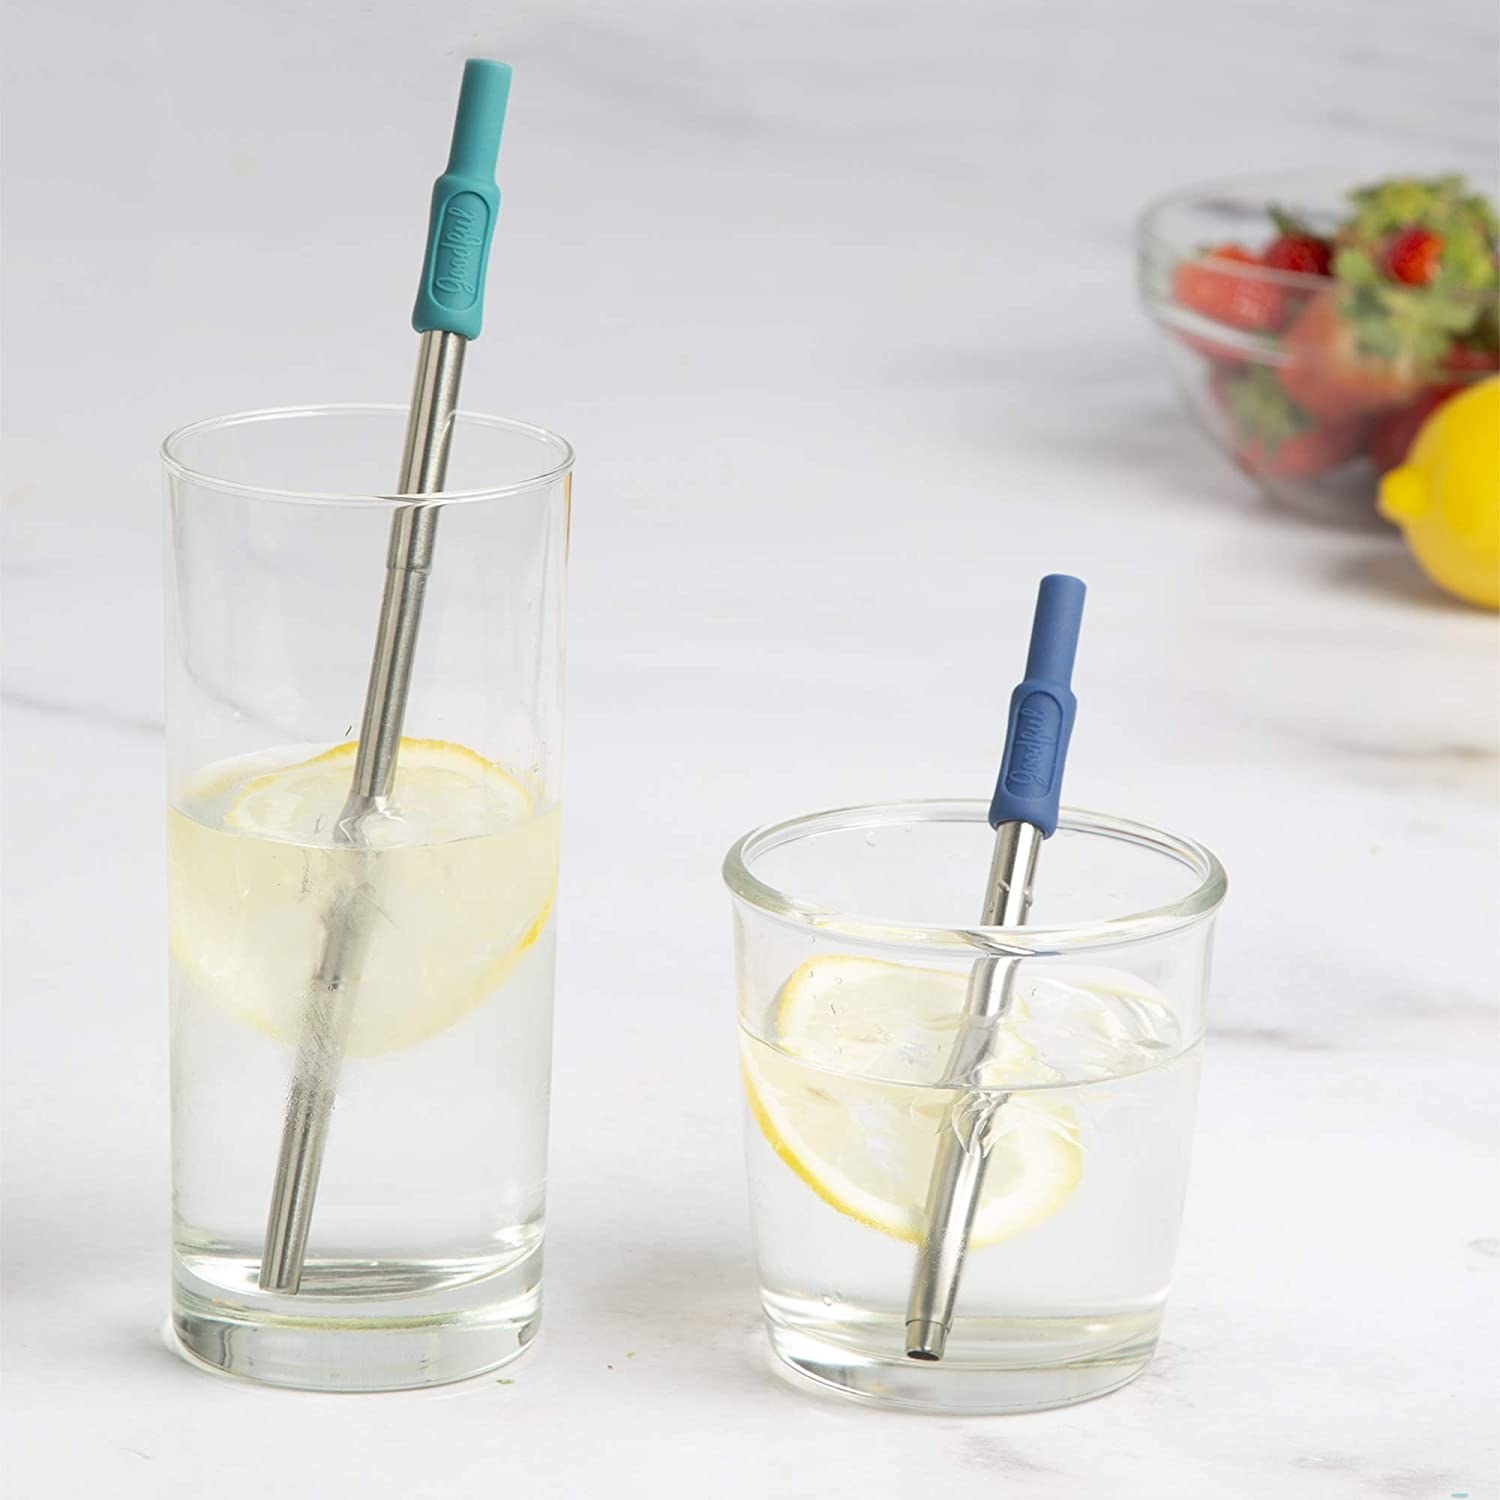 The straws placed in two glasses, one tall, one short. One straw is fully extended while the other one is collapsed